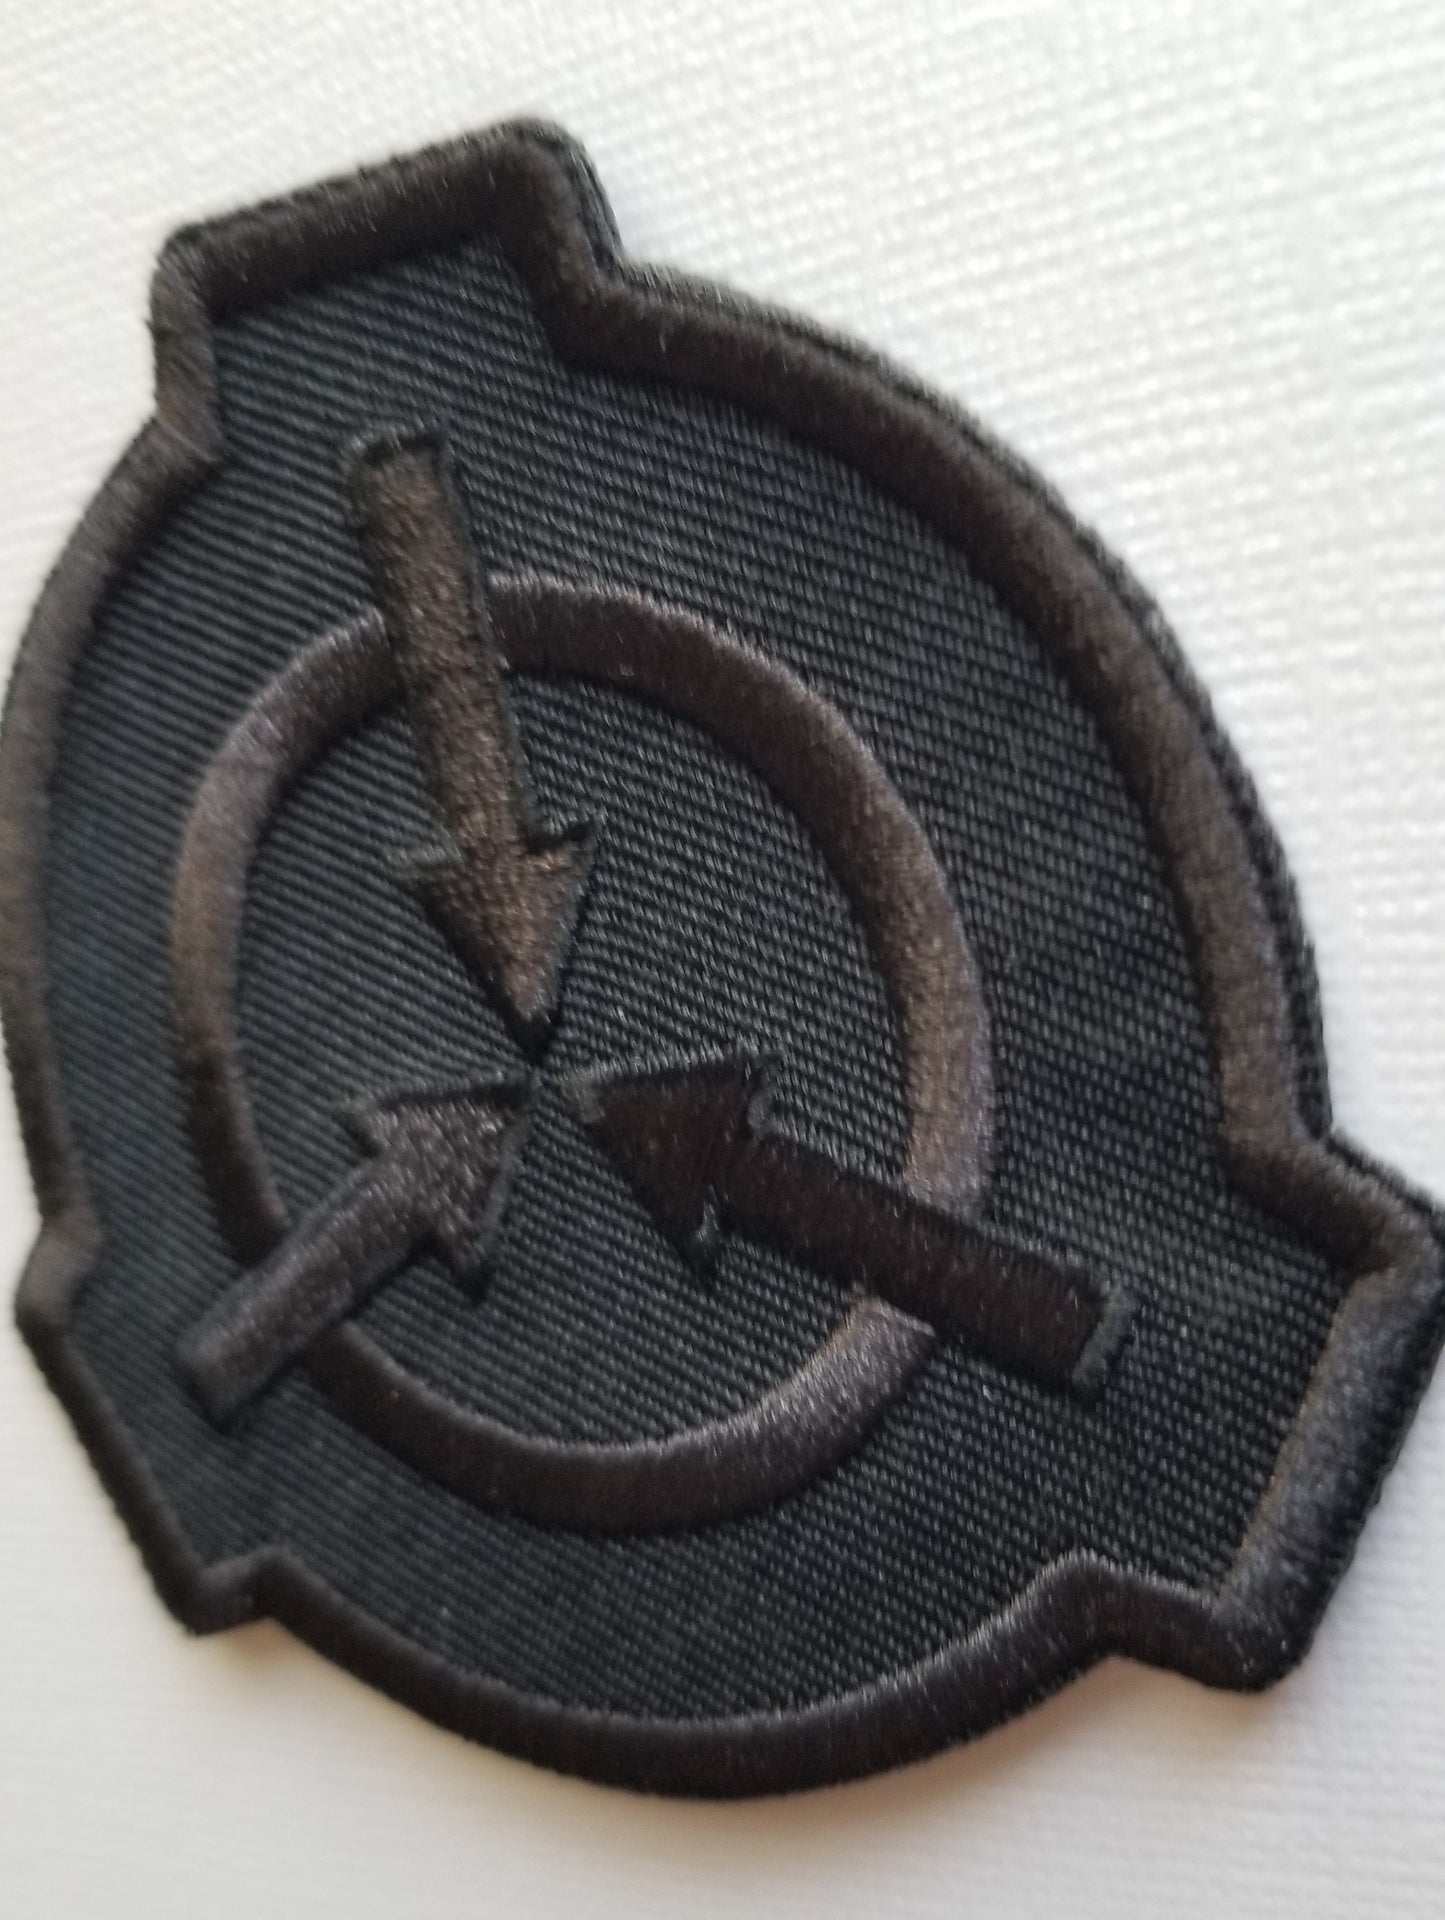 Scp Foundation Badges, Scp Embroidered Patch, Scp Foundation Patch